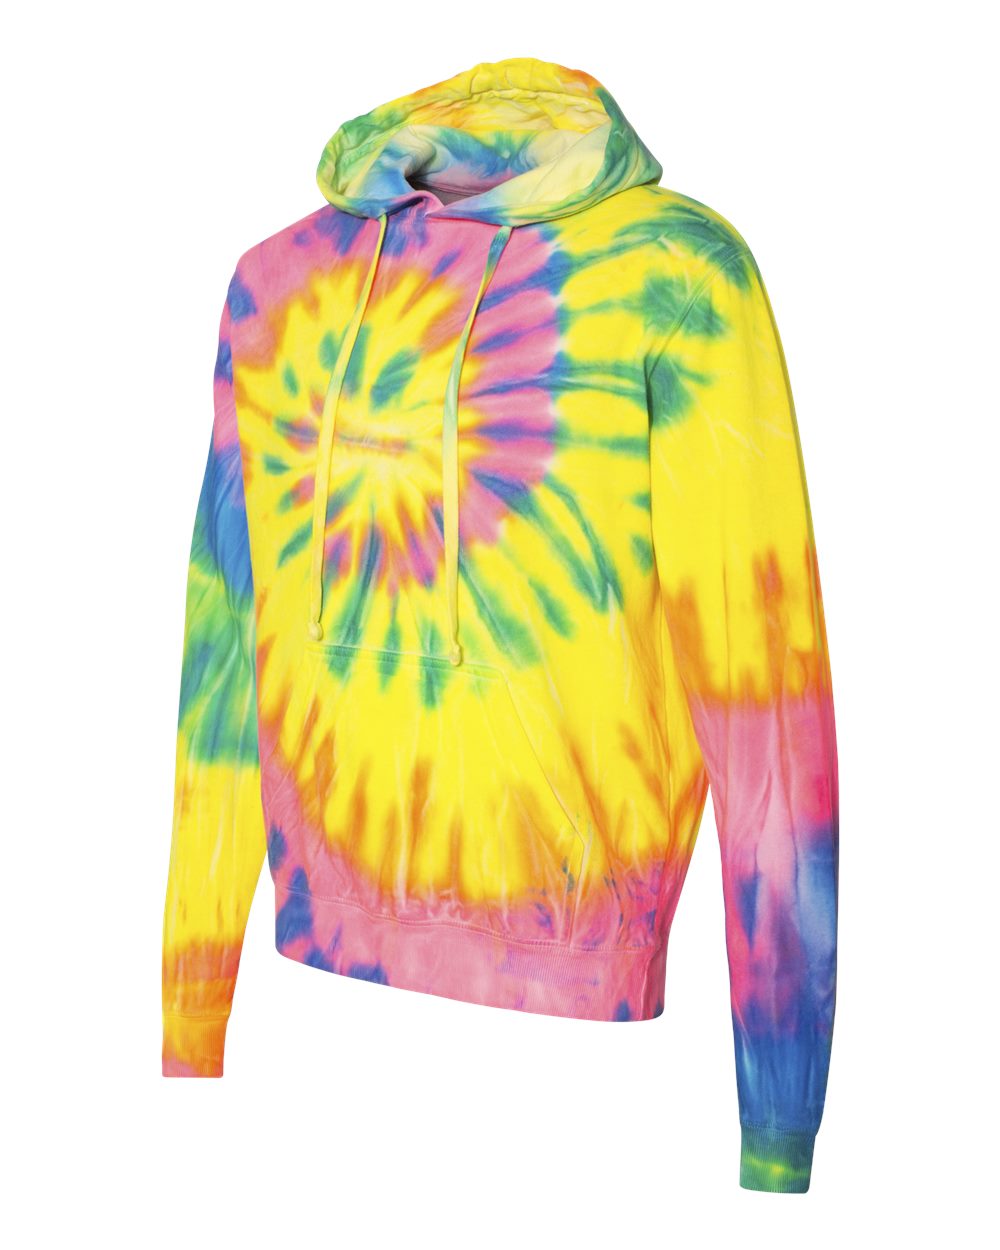 Tie-Dyed 854MS-Multi-Color Spiral Pullover Hooded Sweatshirt $23.72 ...